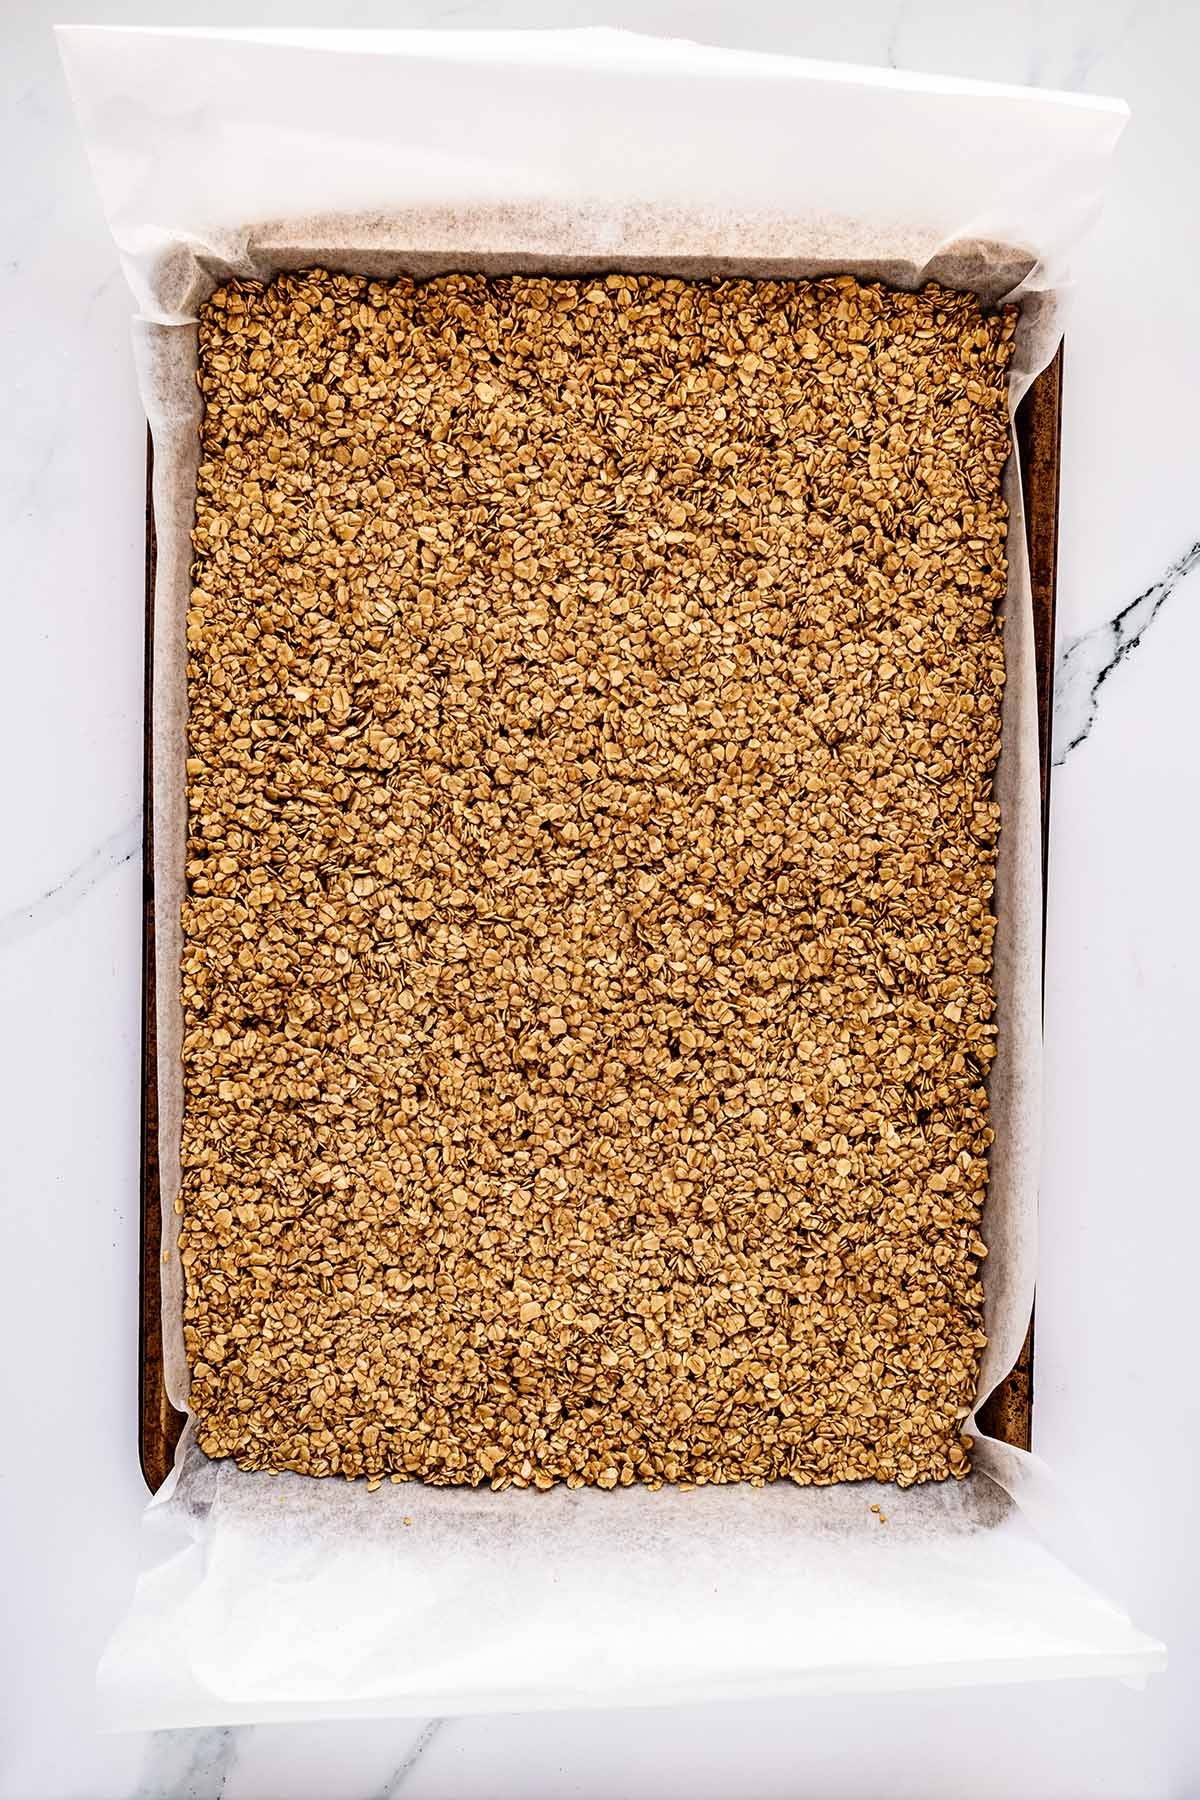 Overhead view of oat mixture in a baking sheet